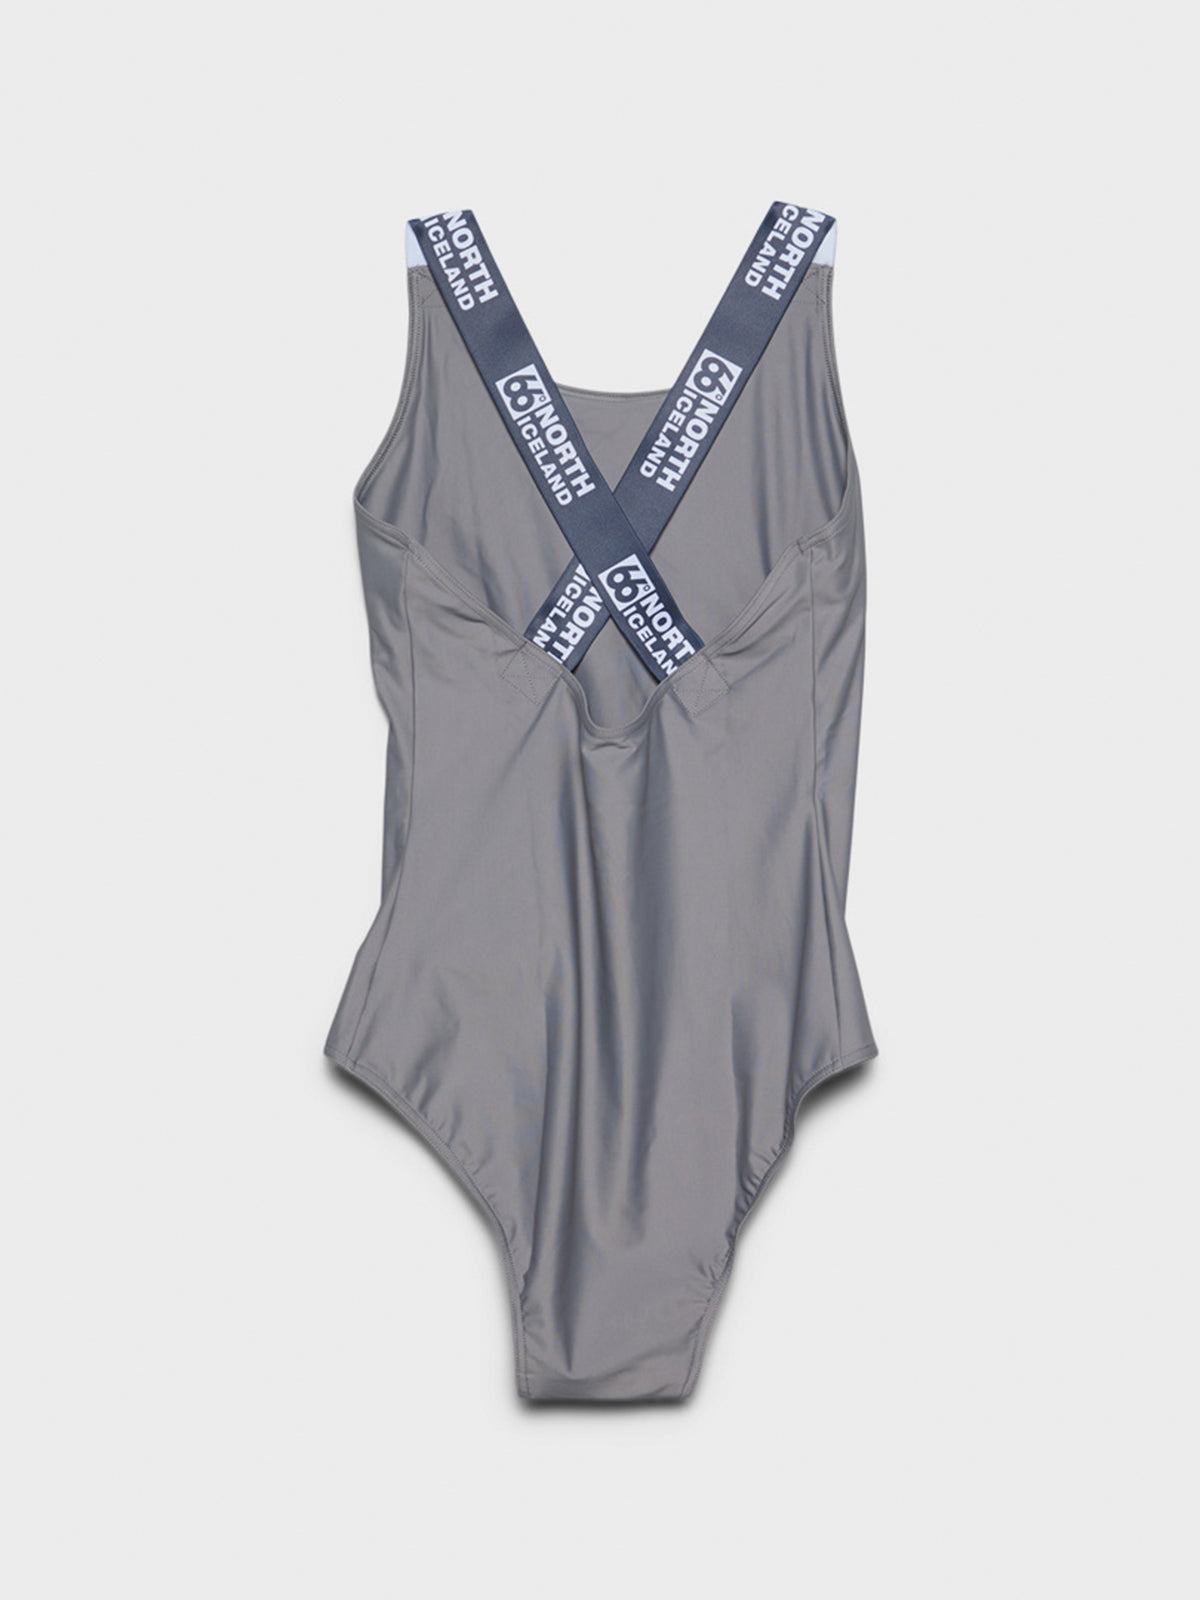 Straumur Swimsuit in Grey